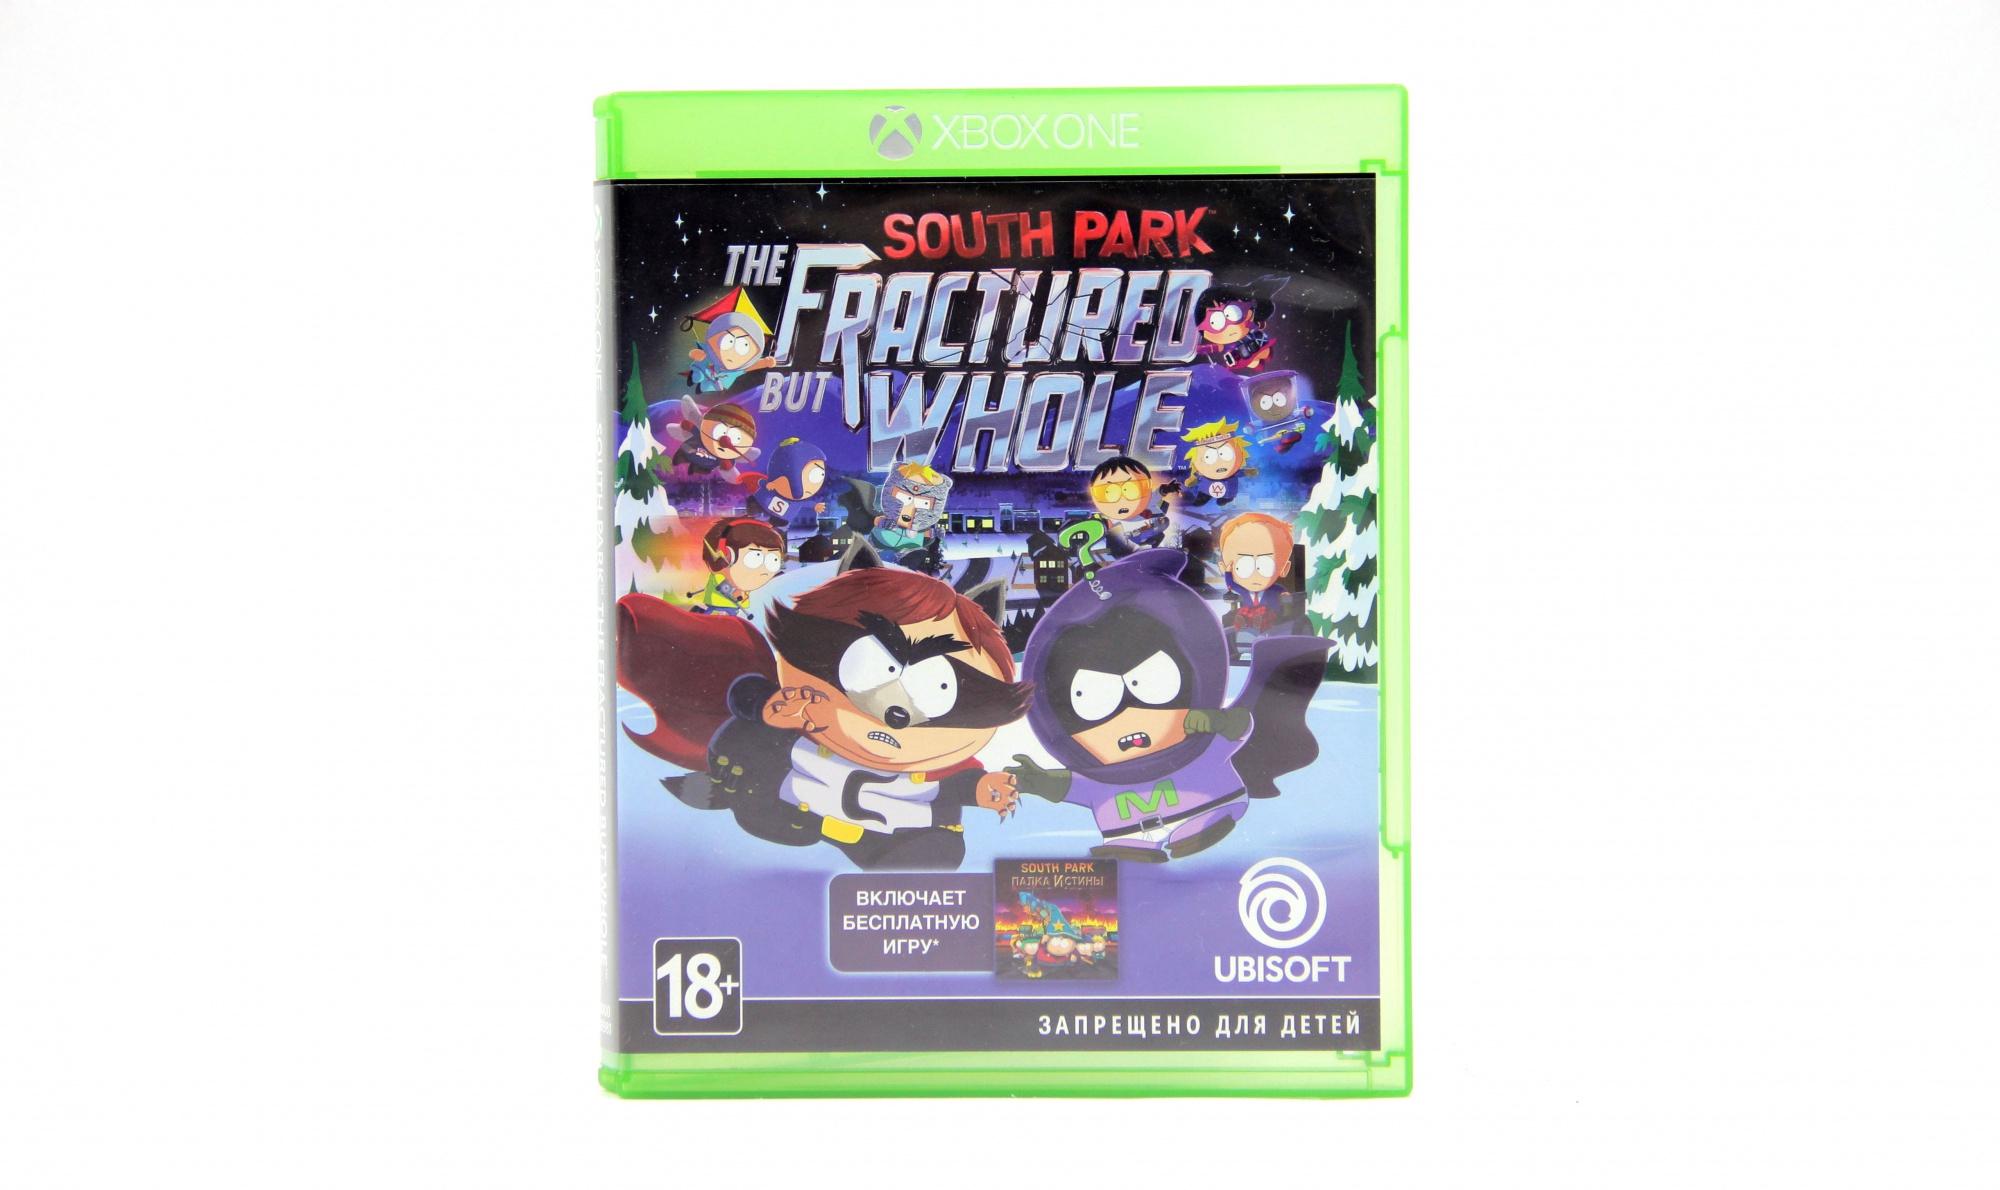 South park the fractured but whole купить ключ steam дешево фото 10